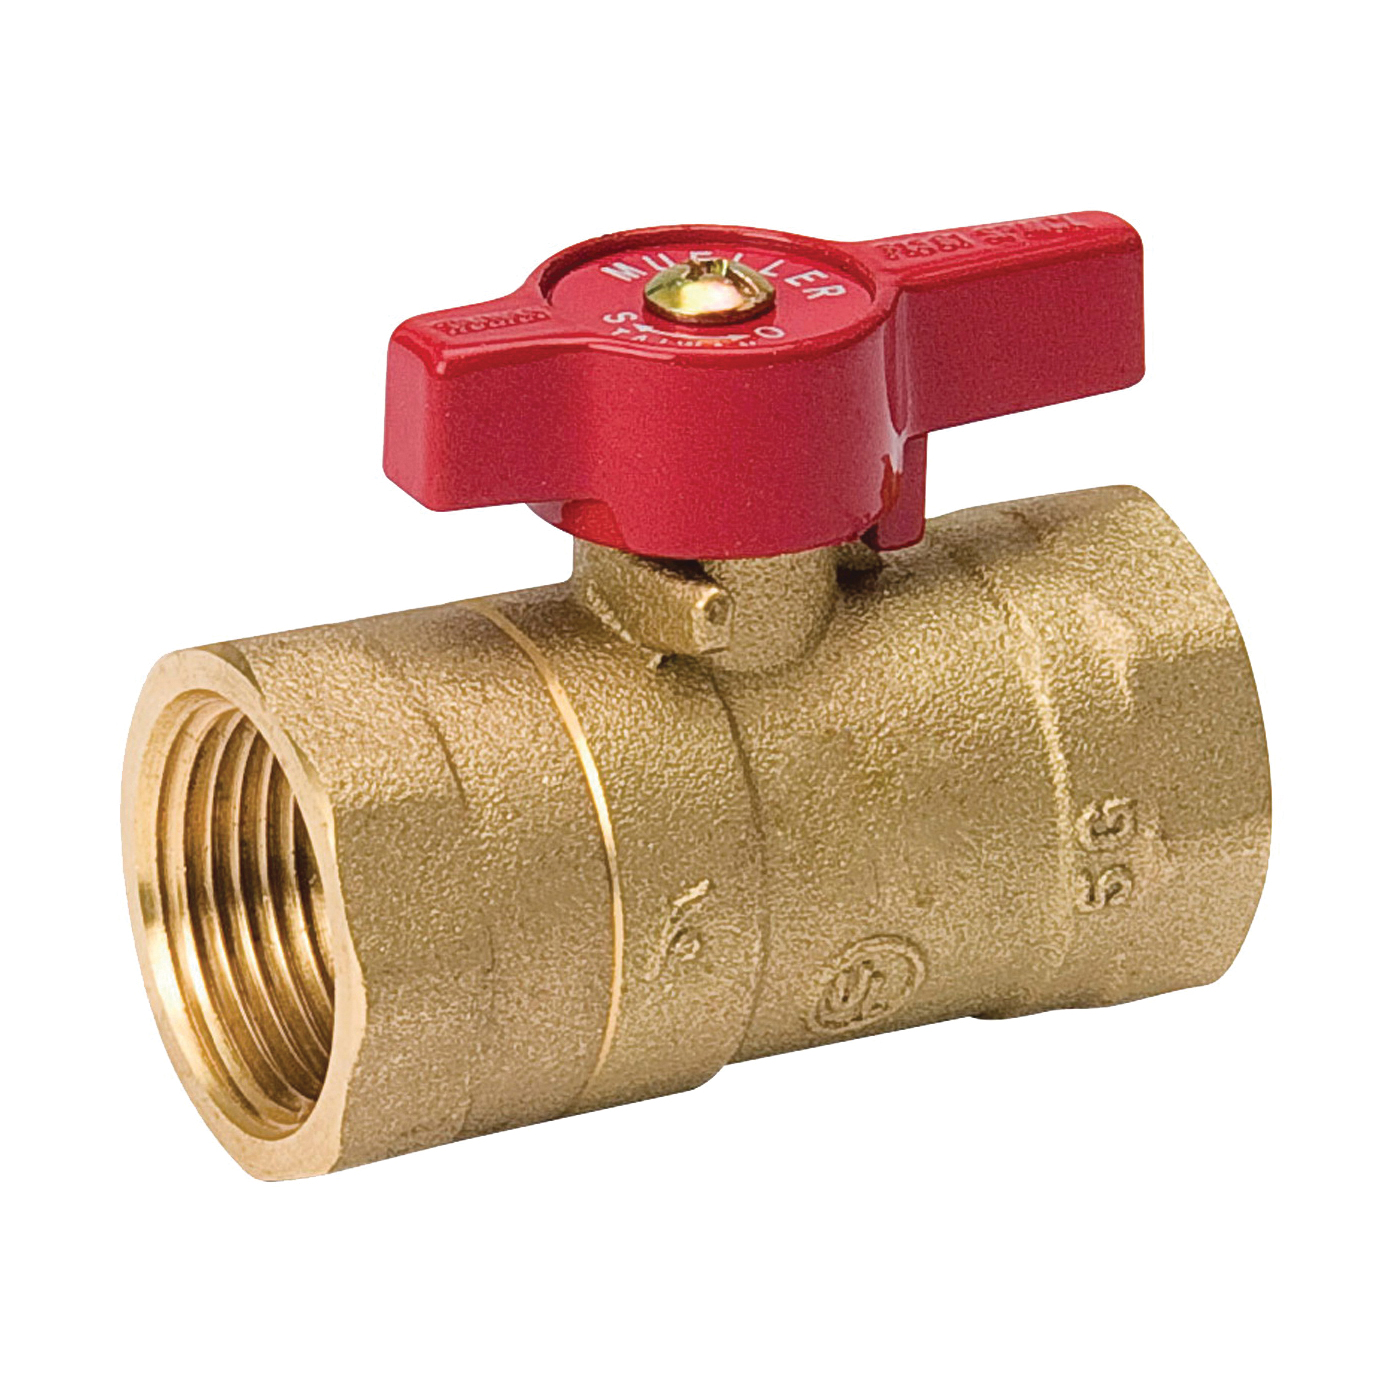 ProLine Series 110-223HC Gas Ball Valve, 1/2 in Connection, FPT, 200 psi Pressure, Manual Actuator, Brass Body